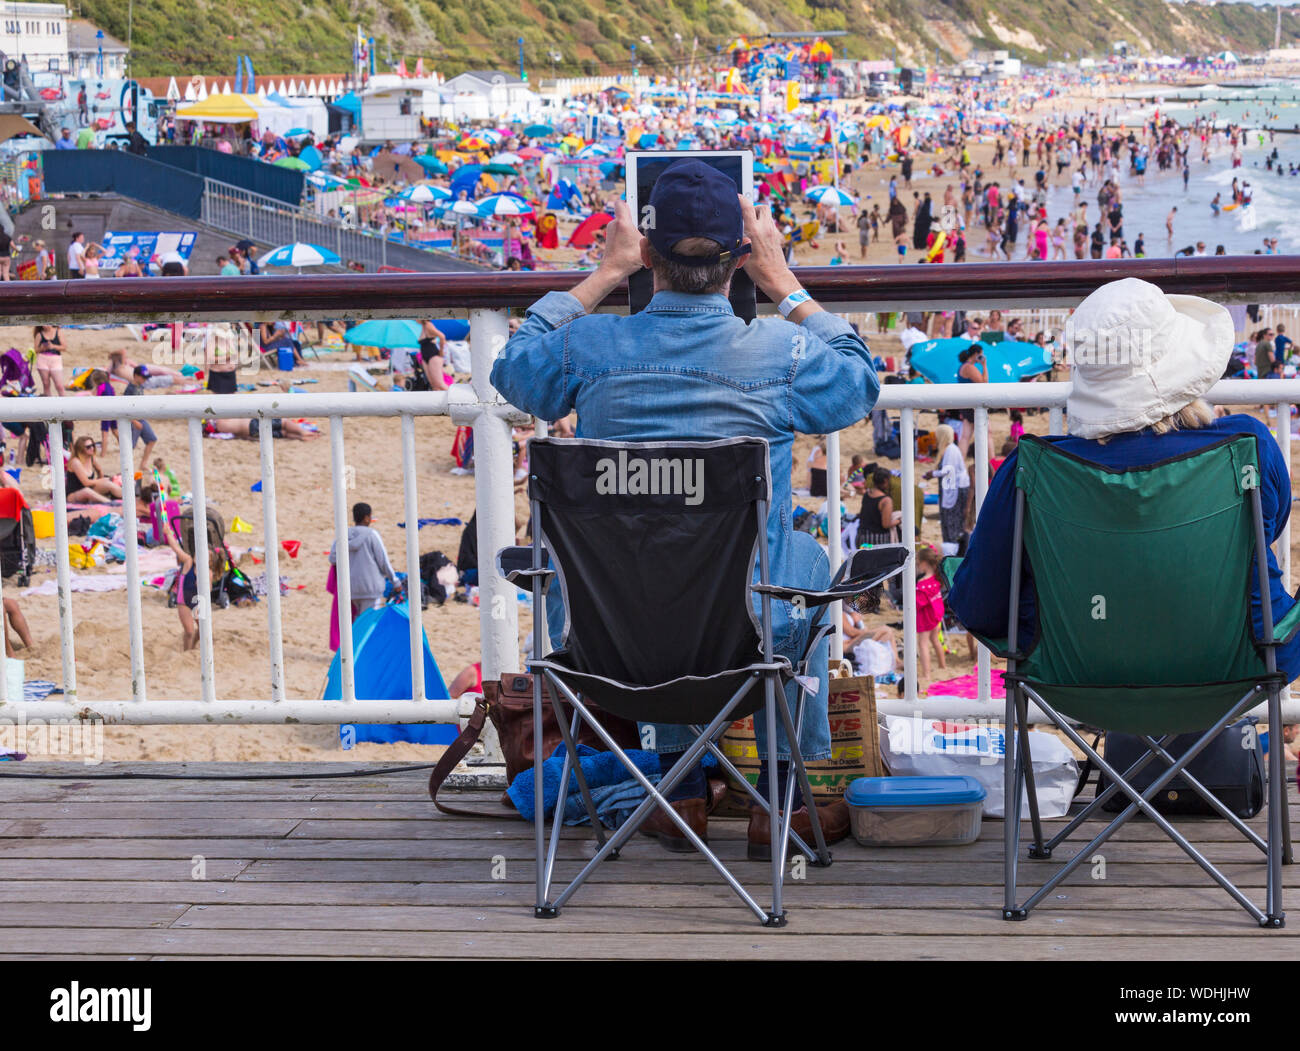 Bournemouth, UK. 29th August 2019. Up to a million people are set to descend on Bournemouth over the next four days as the 12th annual Bournemouth Air Festival gets underway. Credit: Carolyn Jenkins/Alamy Live News Stock Photo